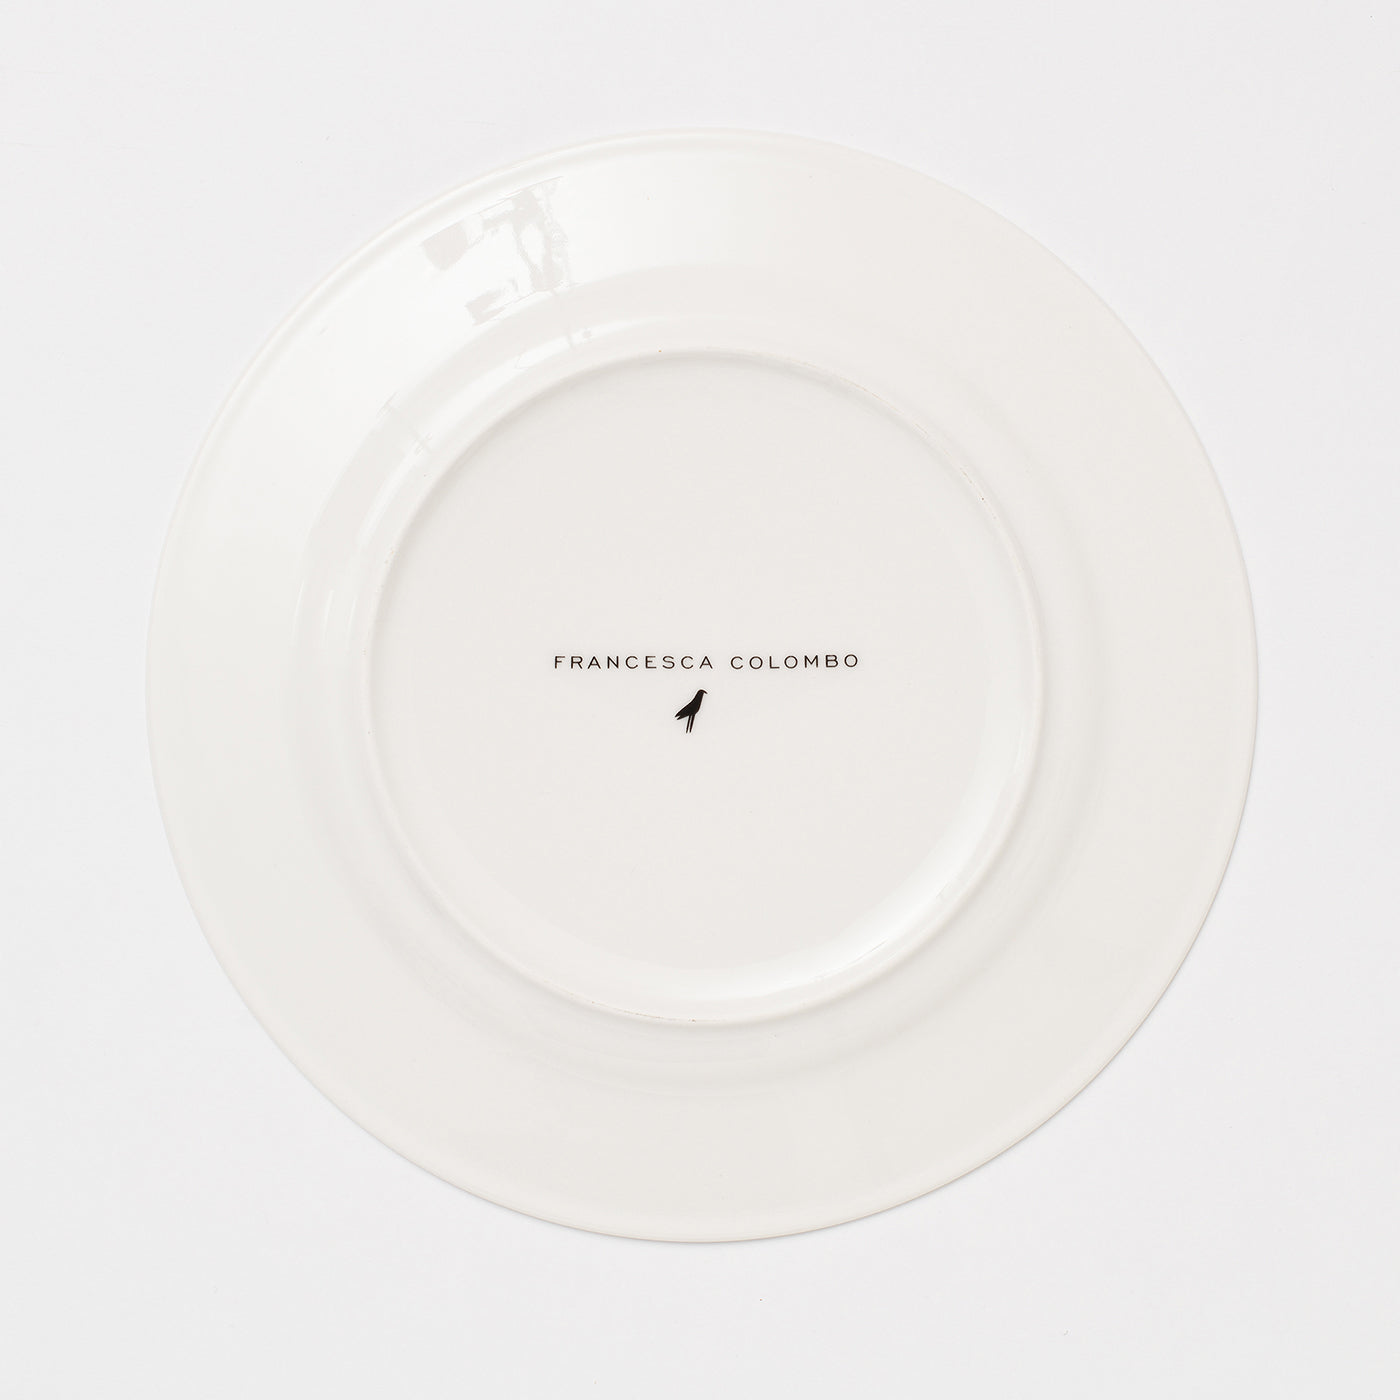 An Ode To The Woods Big Horn Sheep Dinner Plate - Alternative view 2